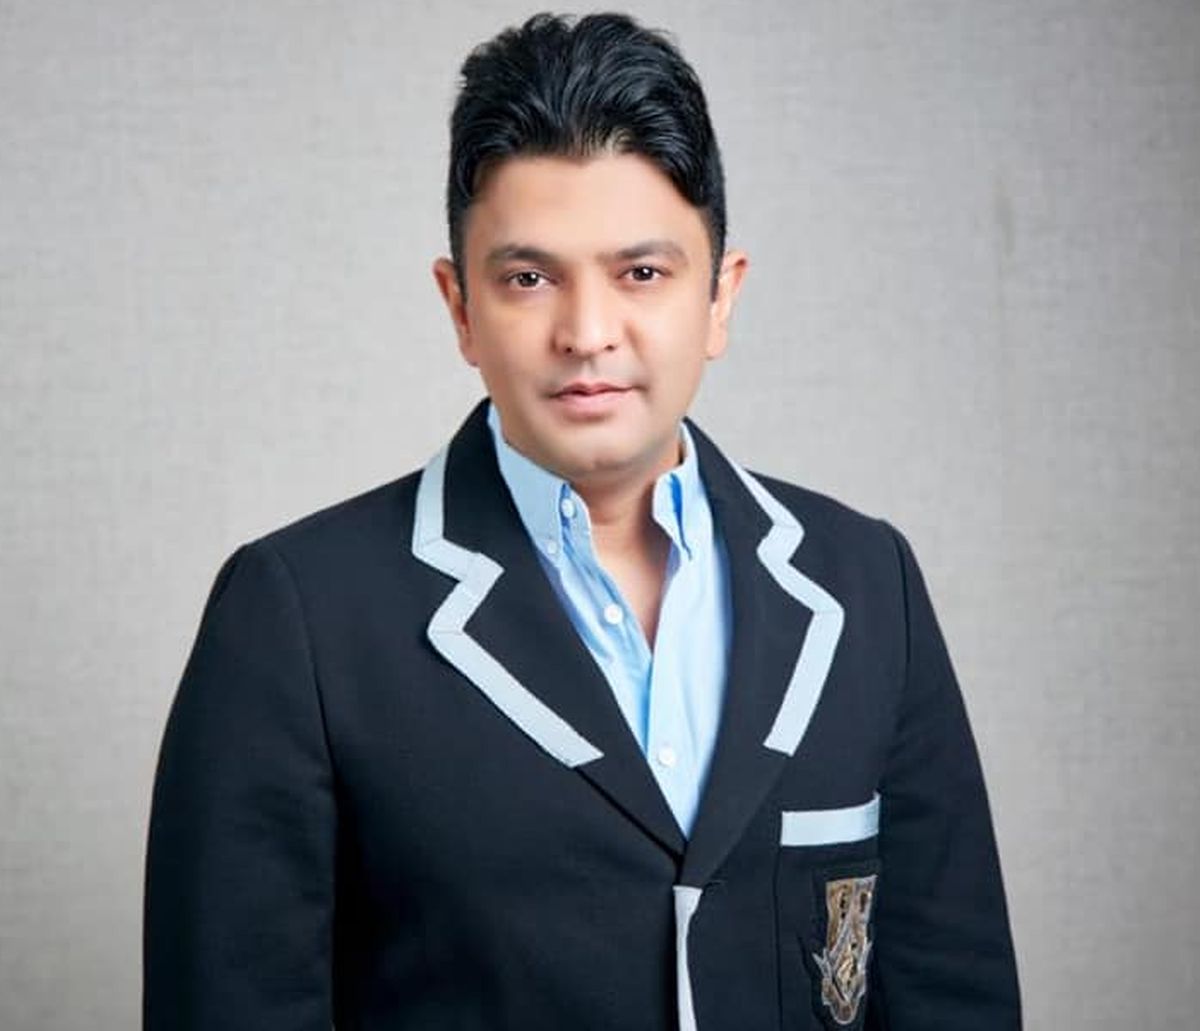 Bhushan Kumar case: T-Series owner alleges extortion